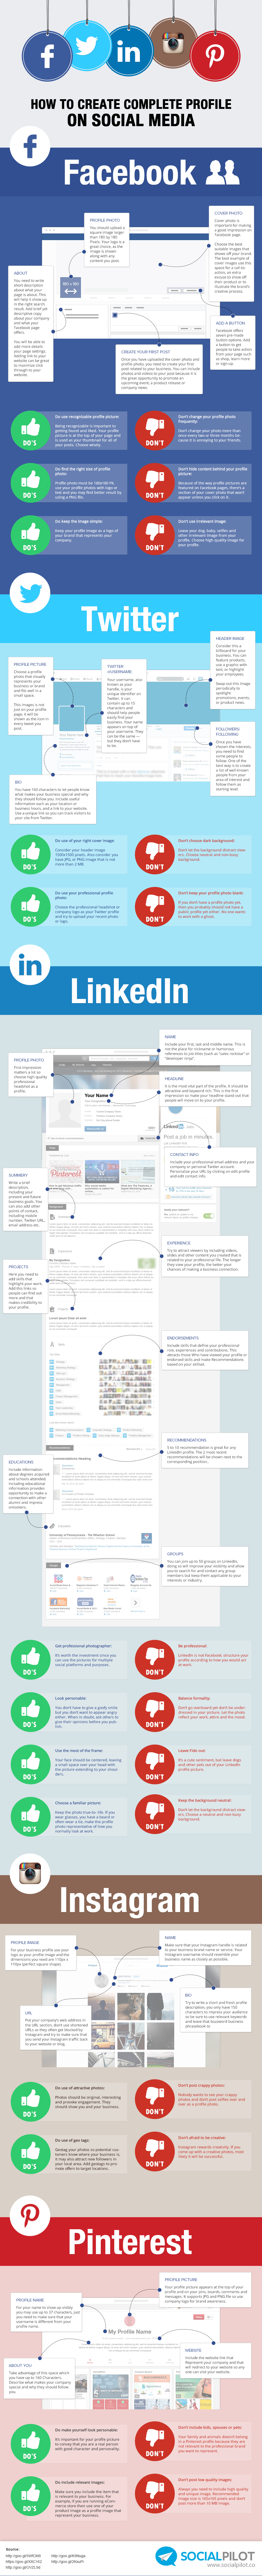 How To Create Complete Profile On Social Media - #Infographic